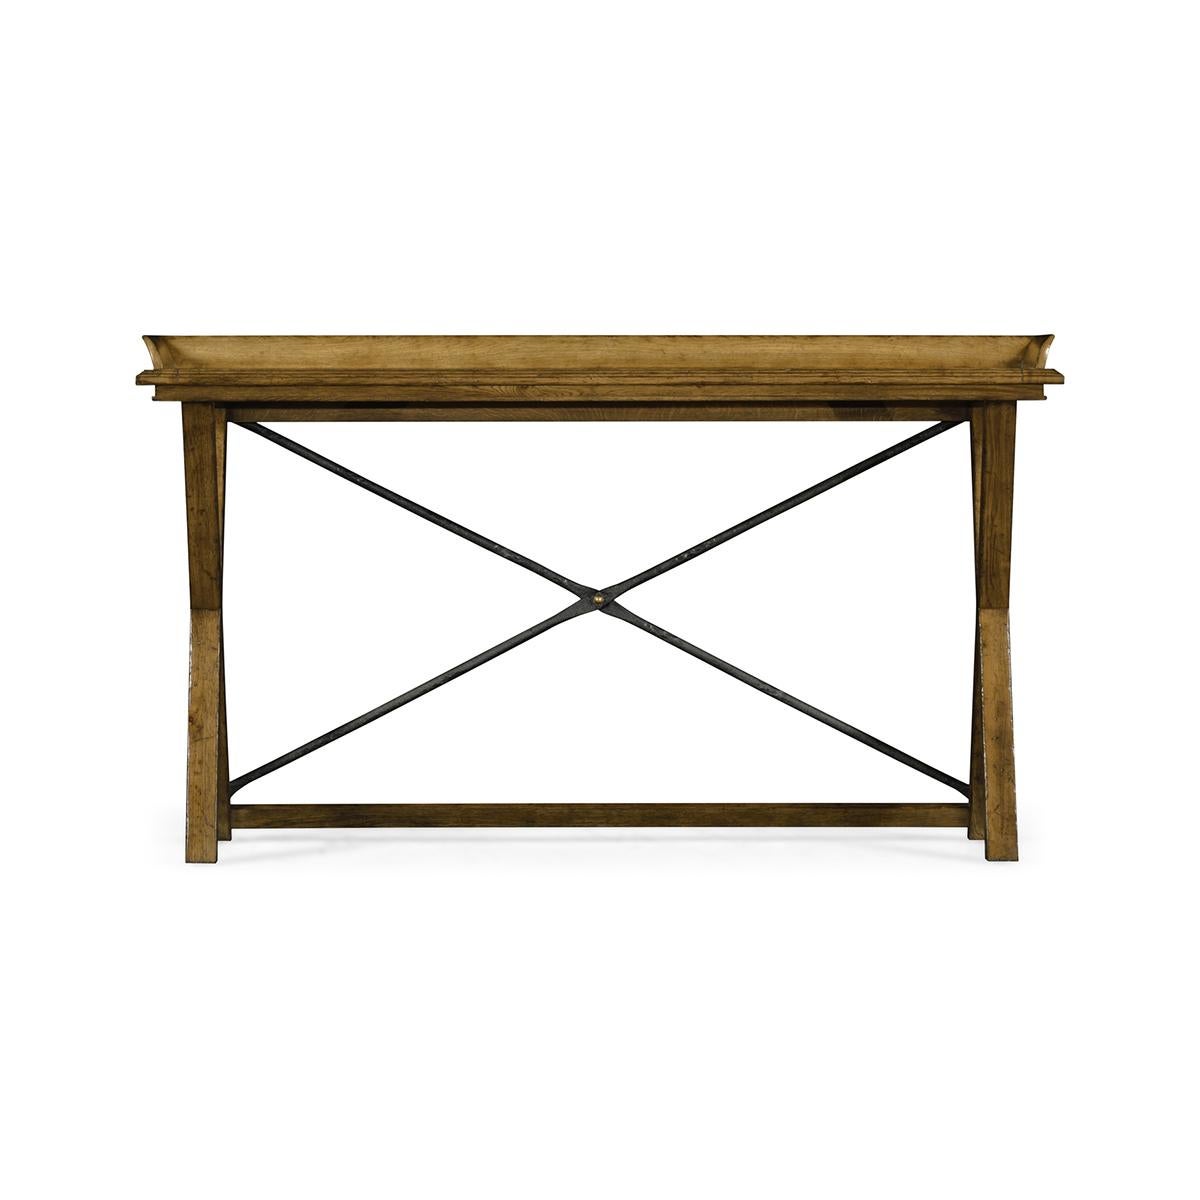 Country Chestnut console table. A narrow light brown Chestnut console table with an unusual angled gallery top with a molded edge above an X frame base with an iron cross member.

Dimensions: 58